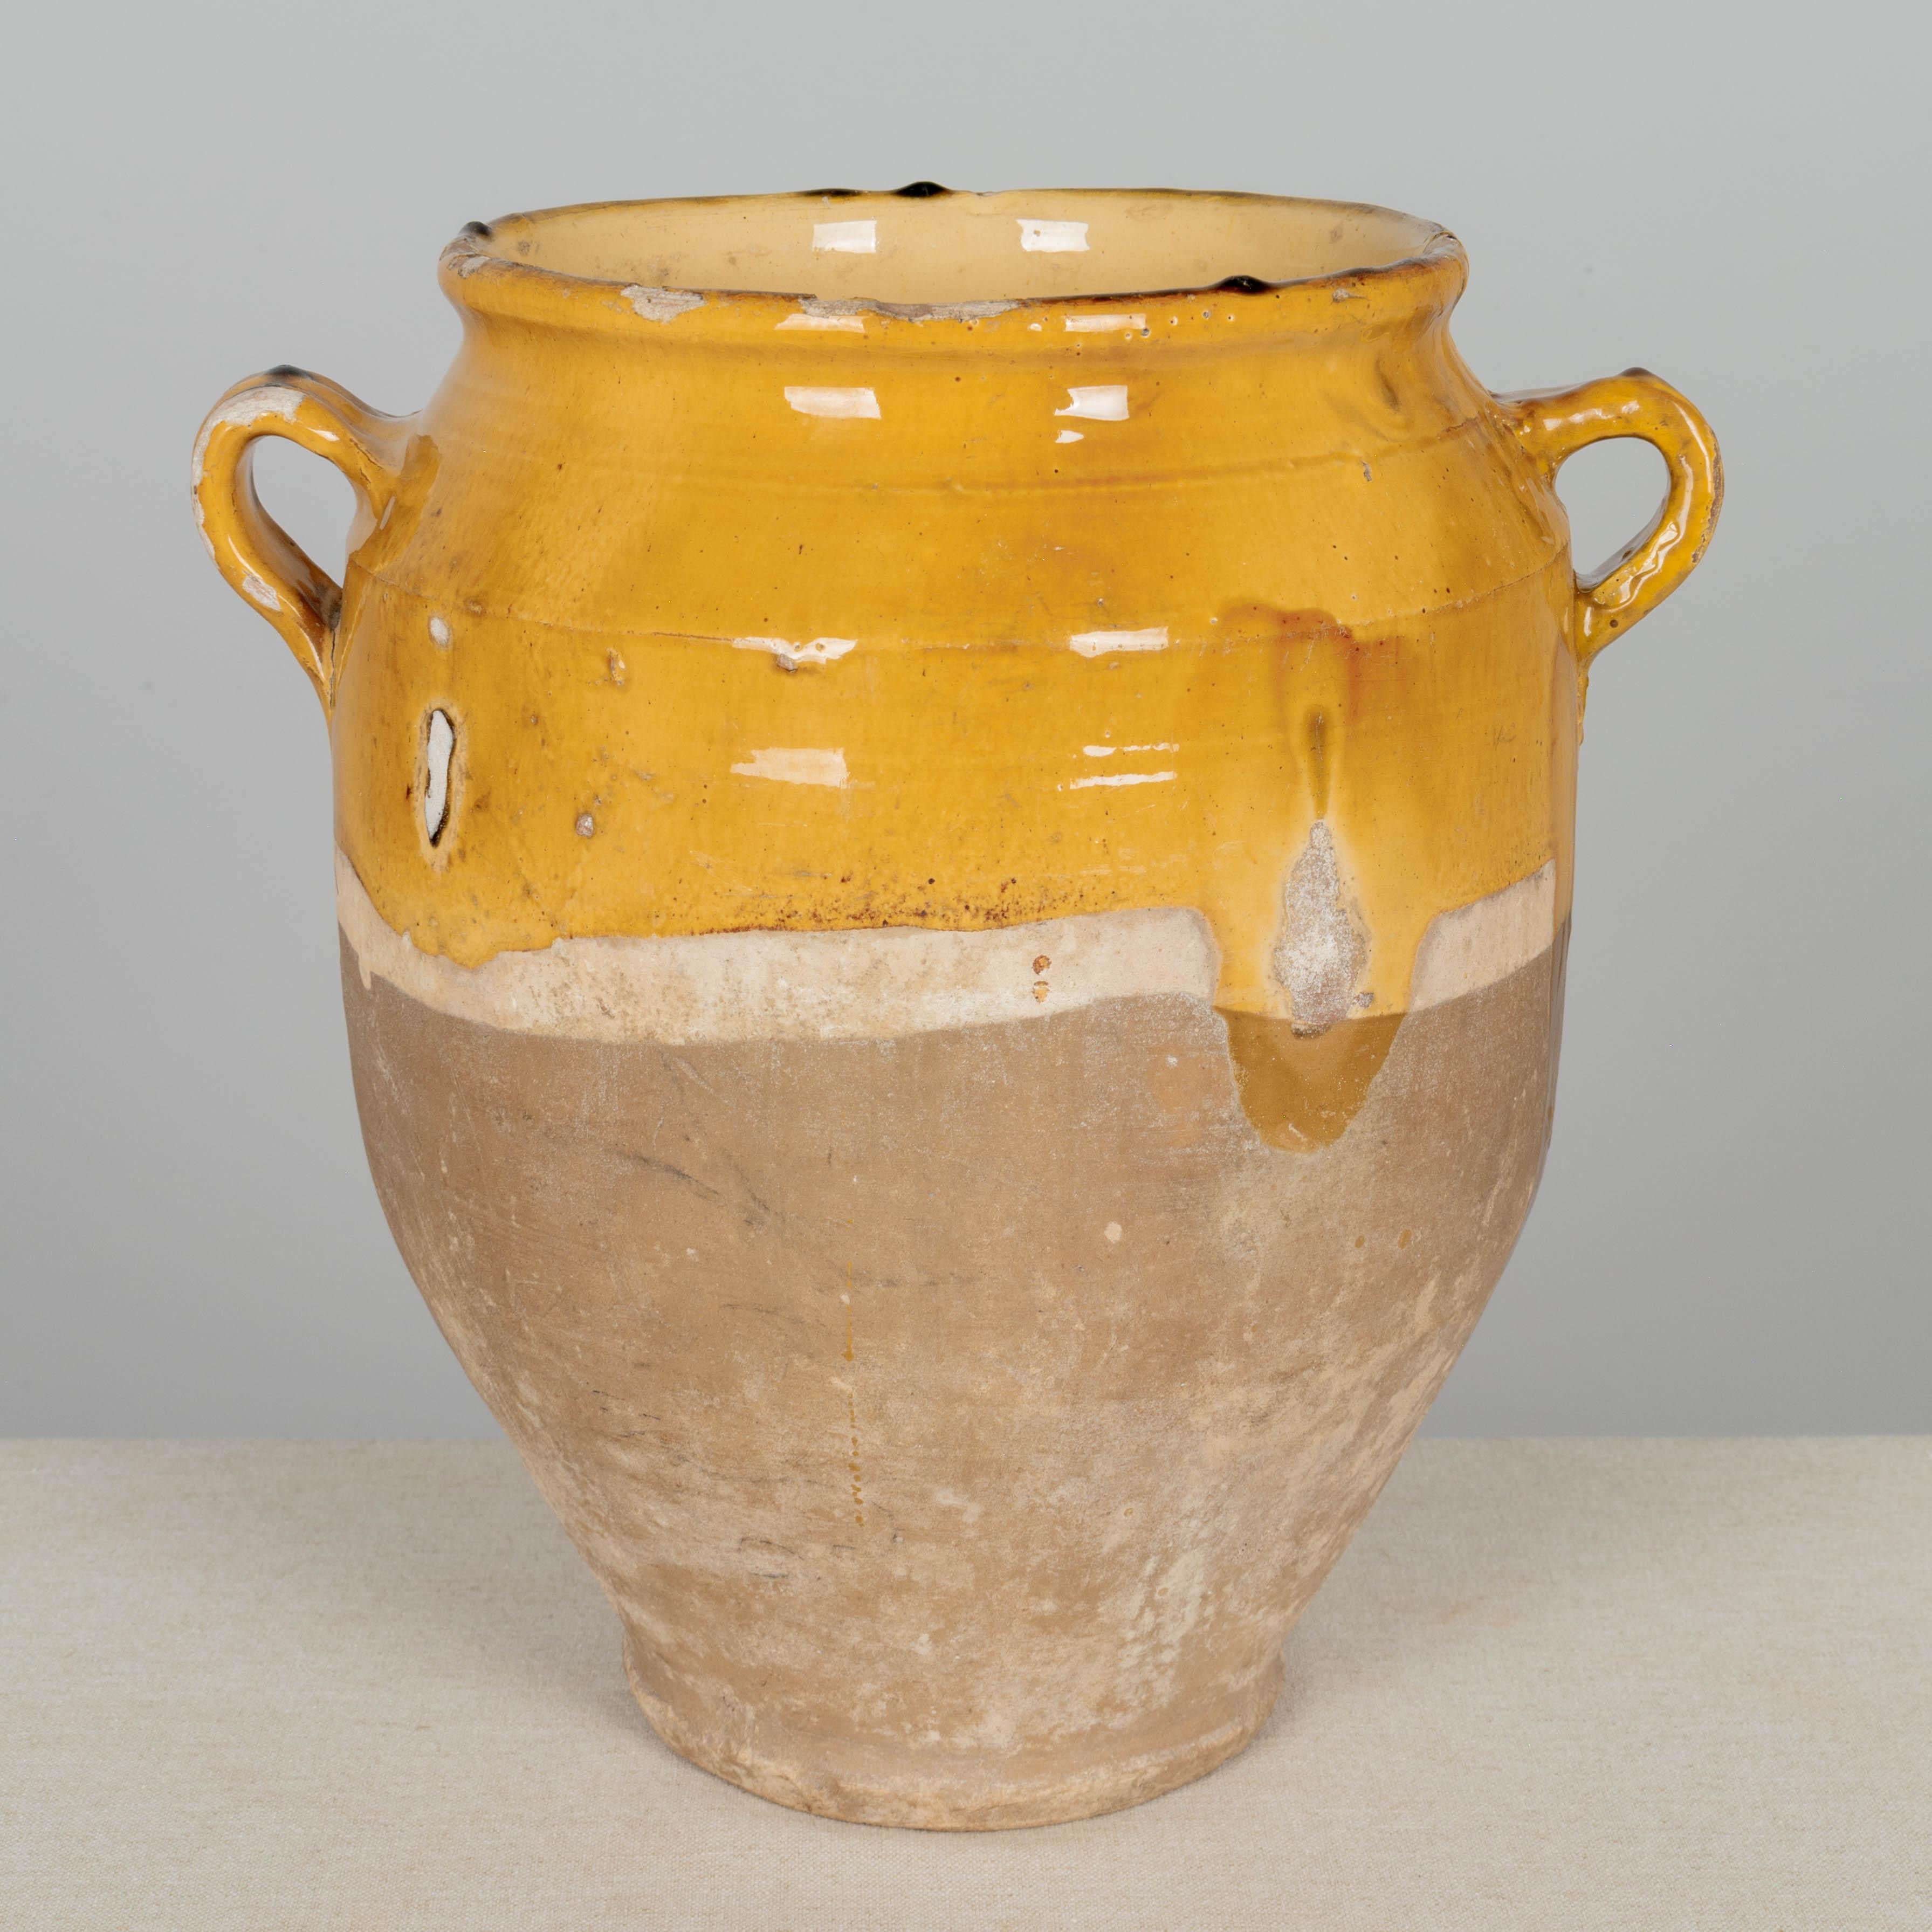 A 19th century French earthenware confit pot with traditional yellow glaze.  Some chips and losses to glaze. These ordinary earthenware vessels were once used daily in the French country home and have beautiful rustic glazes of yellow, green, ochre